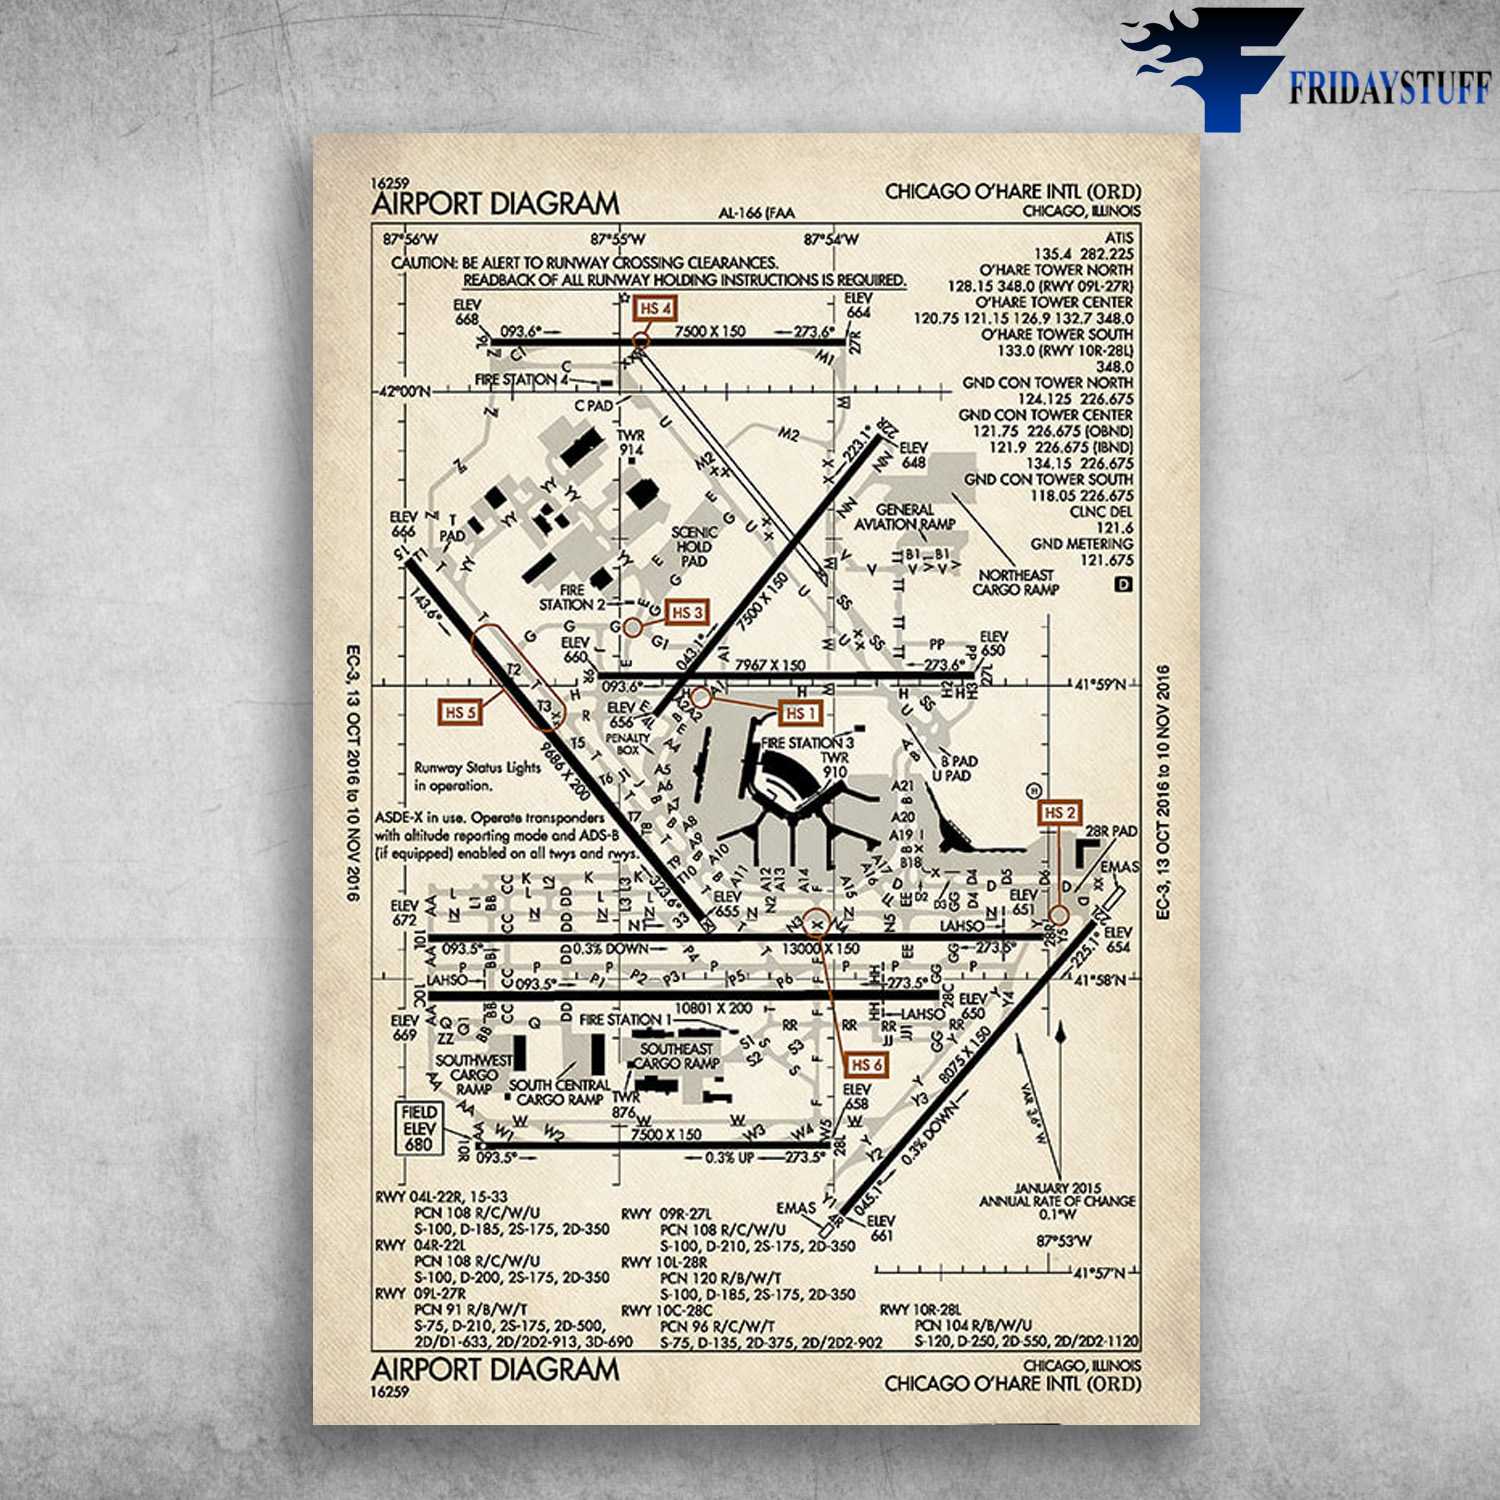 Airport Diagram - Chicago O'Hare Intil (ORD), Caution Be Alert To Runway Crossing Clearance